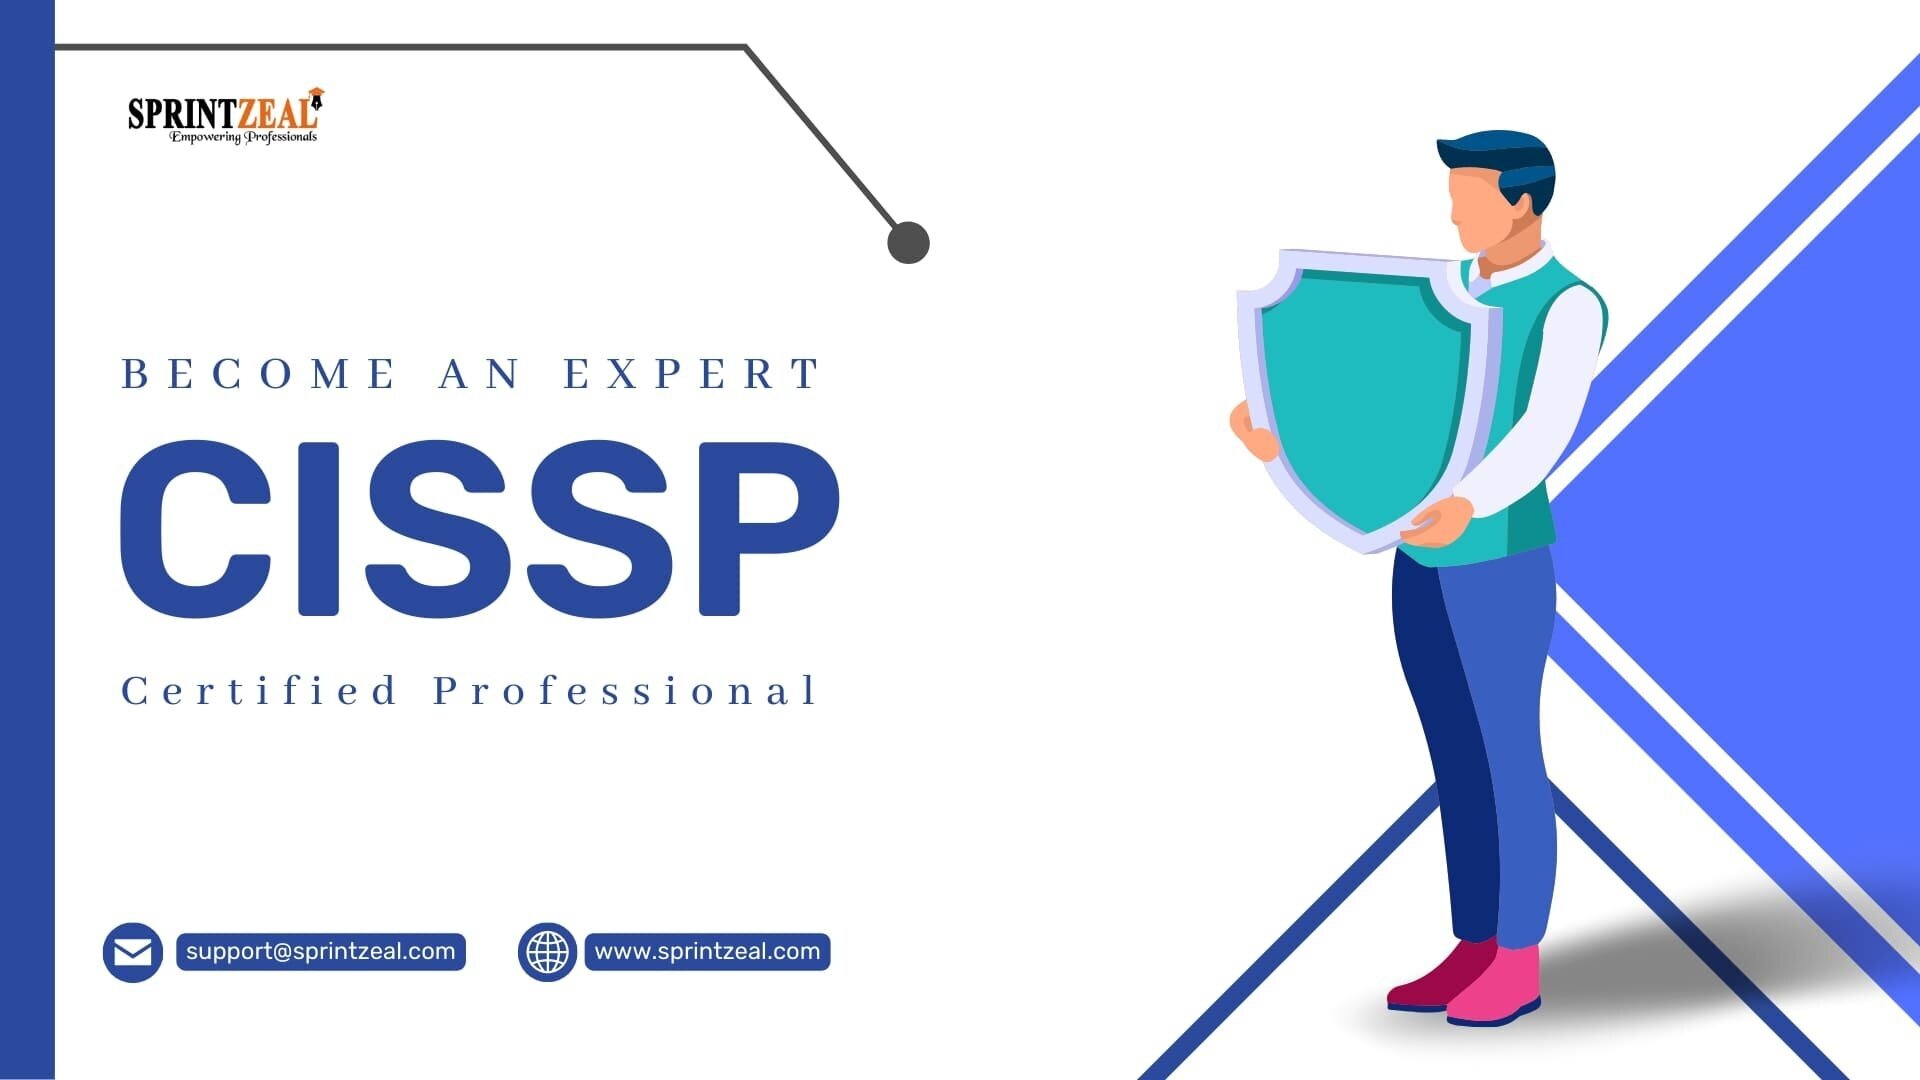 Mastering Information Security: A Guide to CISSP Certification Training